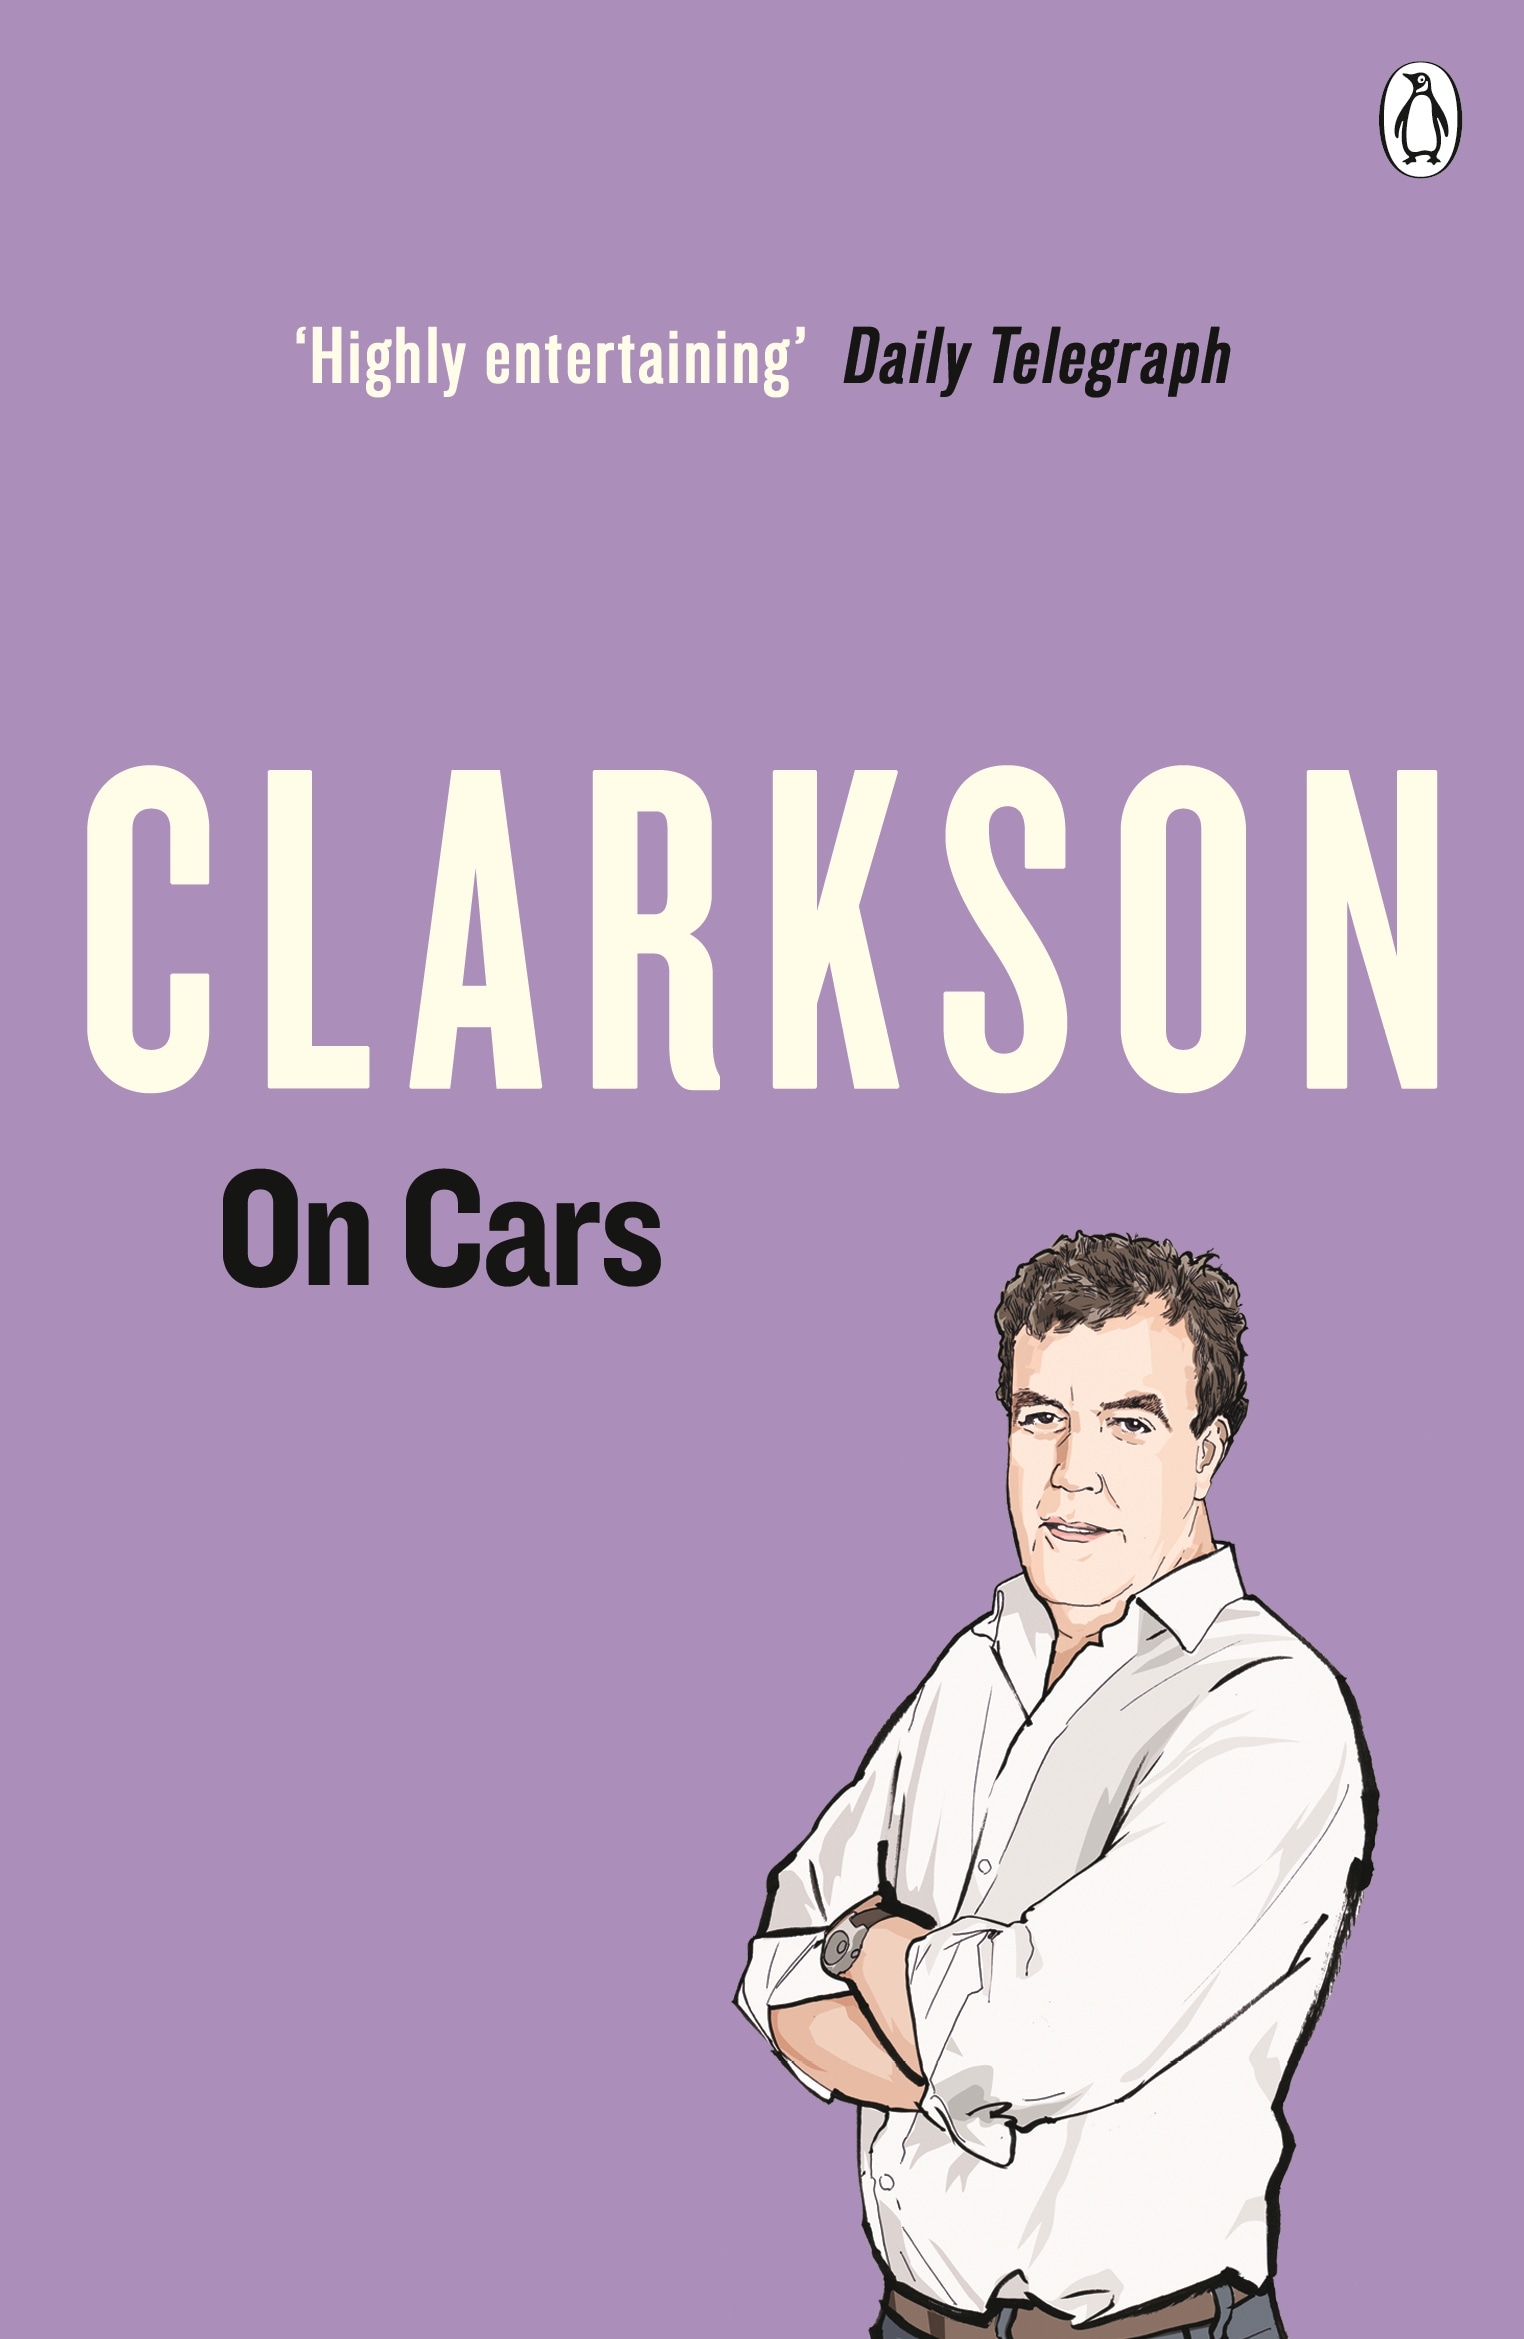 Book “Clarkson on Cars” by Jeremy Clarkson — May 27, 2004